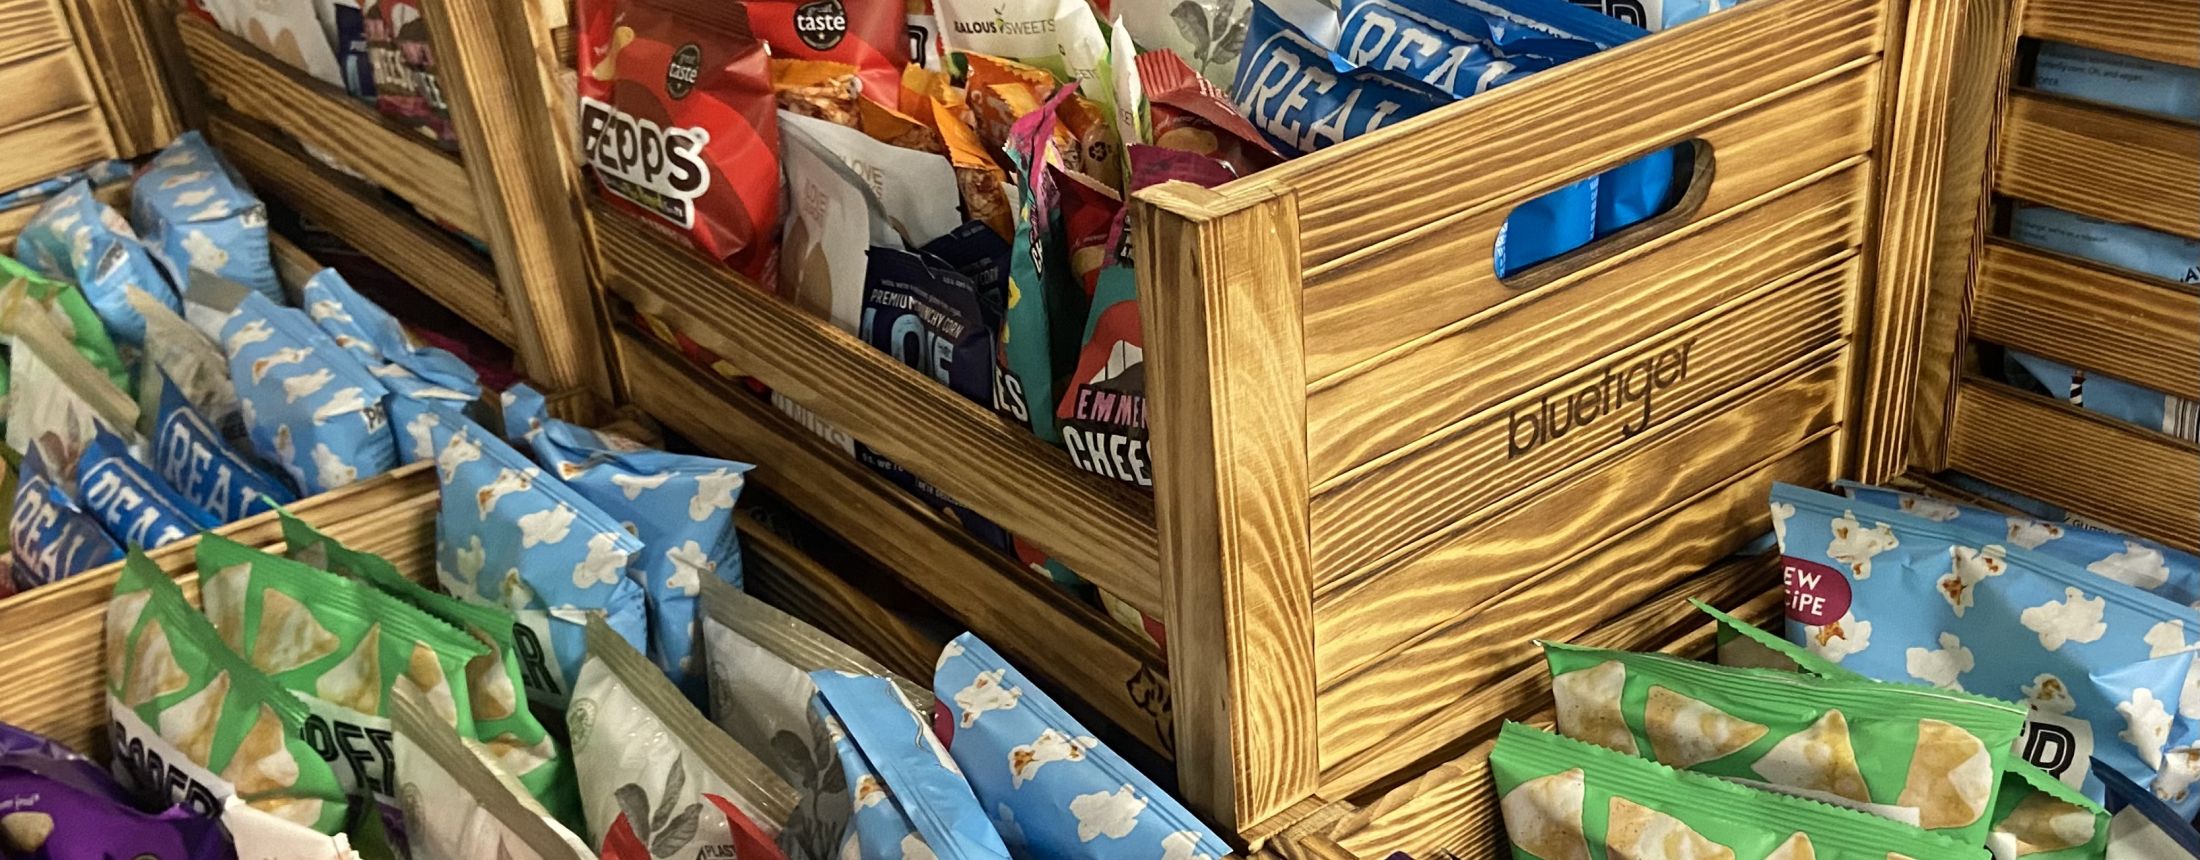 office sharing snack crates